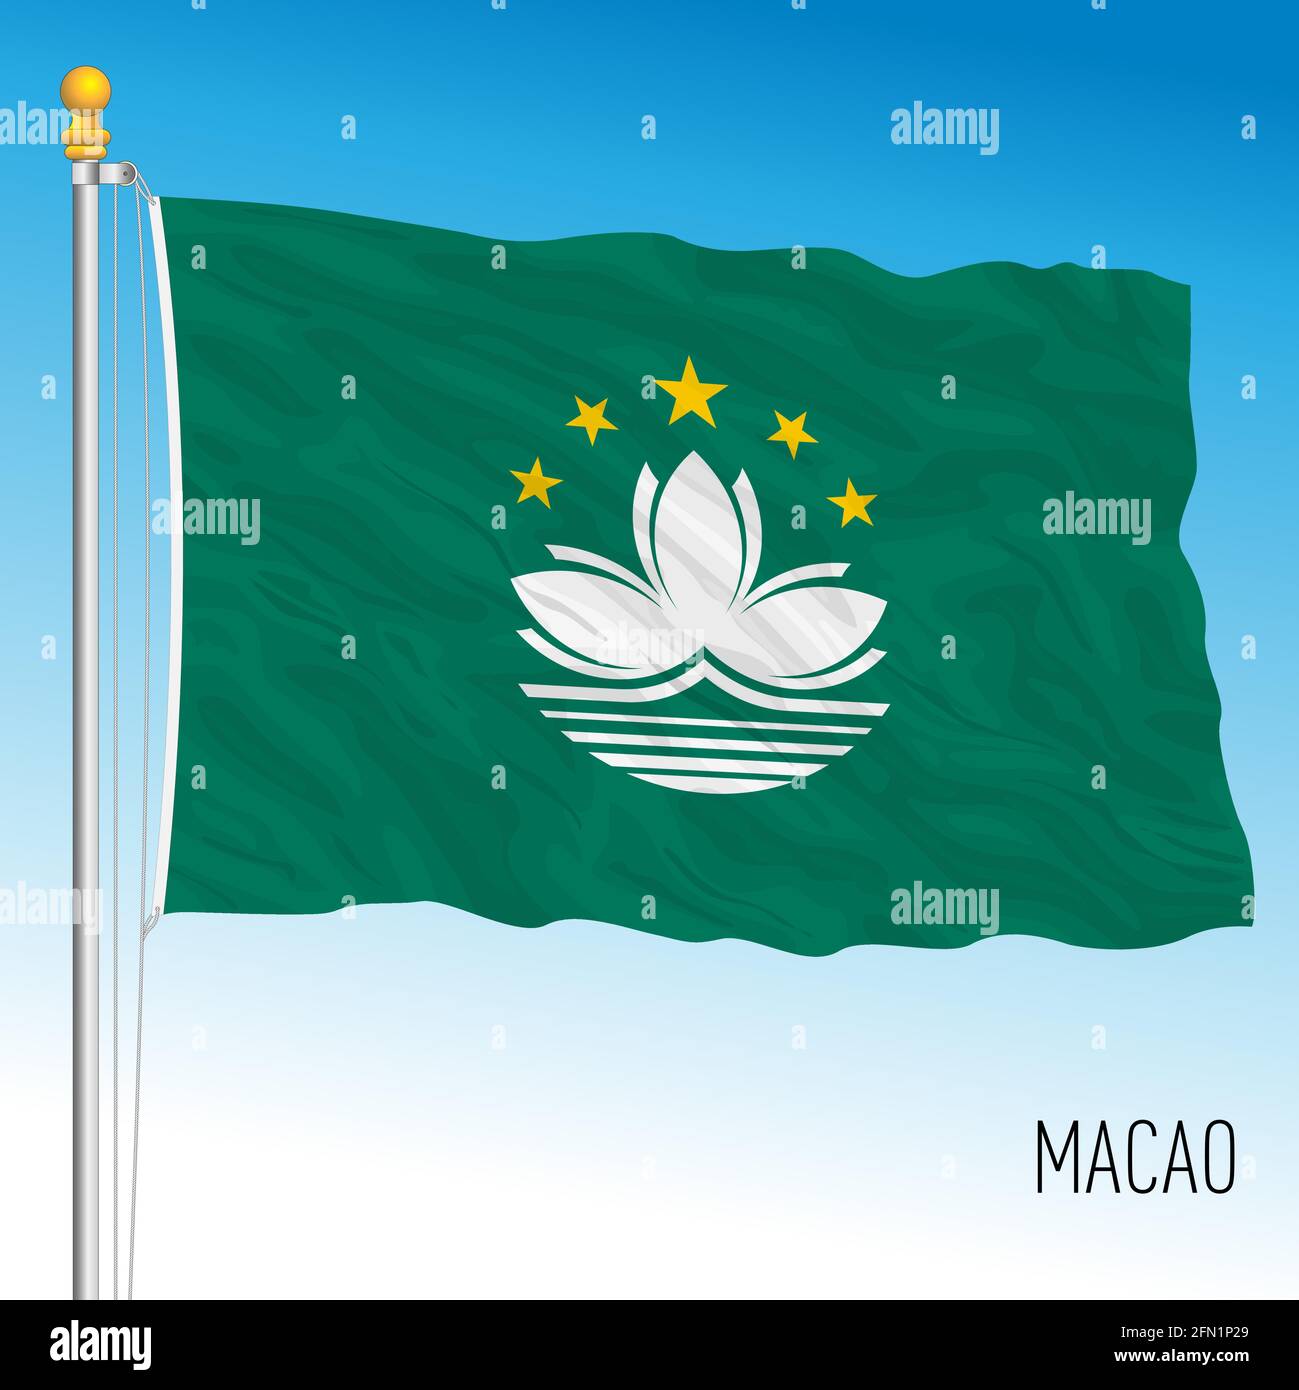 Macau official national flag, asiatic country, vector illustration Stock Vector